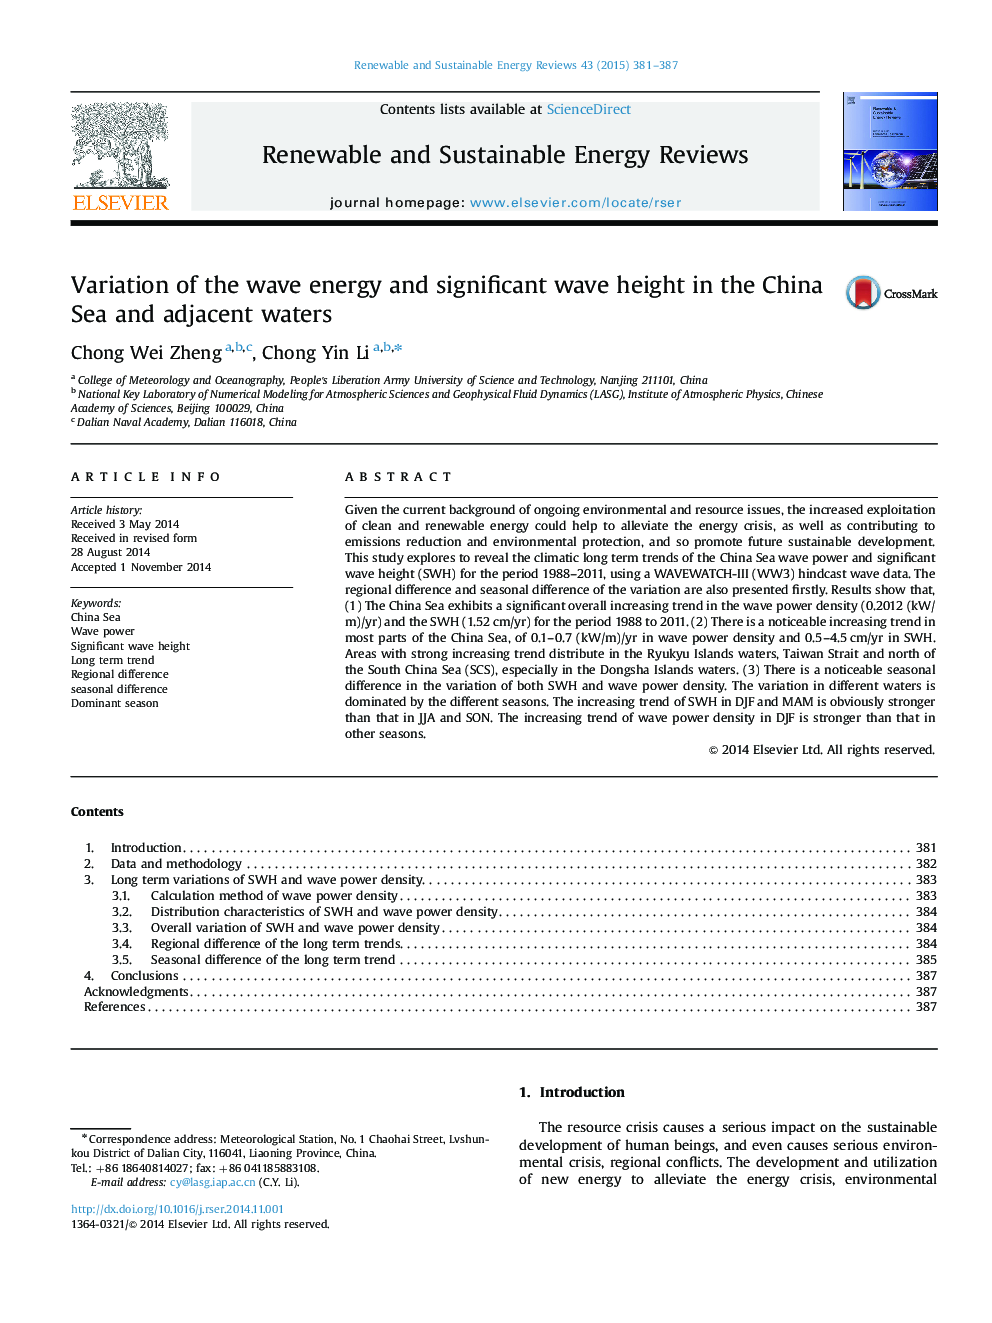 Variation of the wave energy and significant wave height in the China Sea and adjacent waters